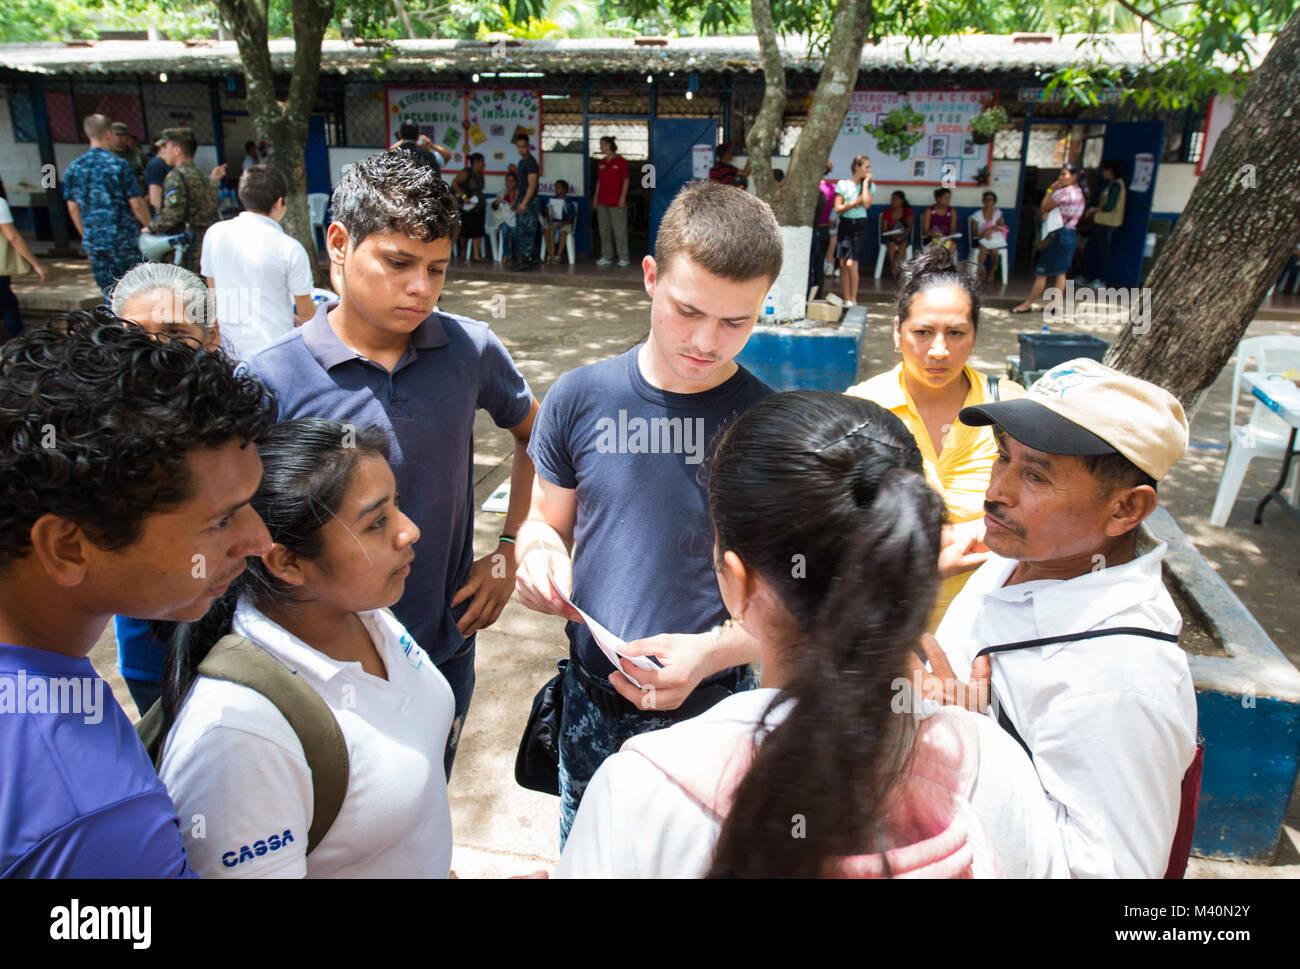 150617-N-PD309-259 SAN JULIAN, El Salvador (June 17, 2015) Hospitalman Donald Embrey, a native of Mineral, Va., assigned to Naval Air Station Oceana Branch Health Clinic Dam Neck Annex, Va., speaks with patients at a medical site established at Centro Escolar Doctor Eduardo Enrique Barrientos during Continuing Promise 2015. Continuing Promise is a U.S. Southern Command-sponsored and U.S. Naval Forces Southern Command/U.S. 4th Fleet-conducted deployment to conduct civil-military operations including humanitarian-civil assistance, subject matter expert exchanges, medical, dental, veterinary and  Stock Photo